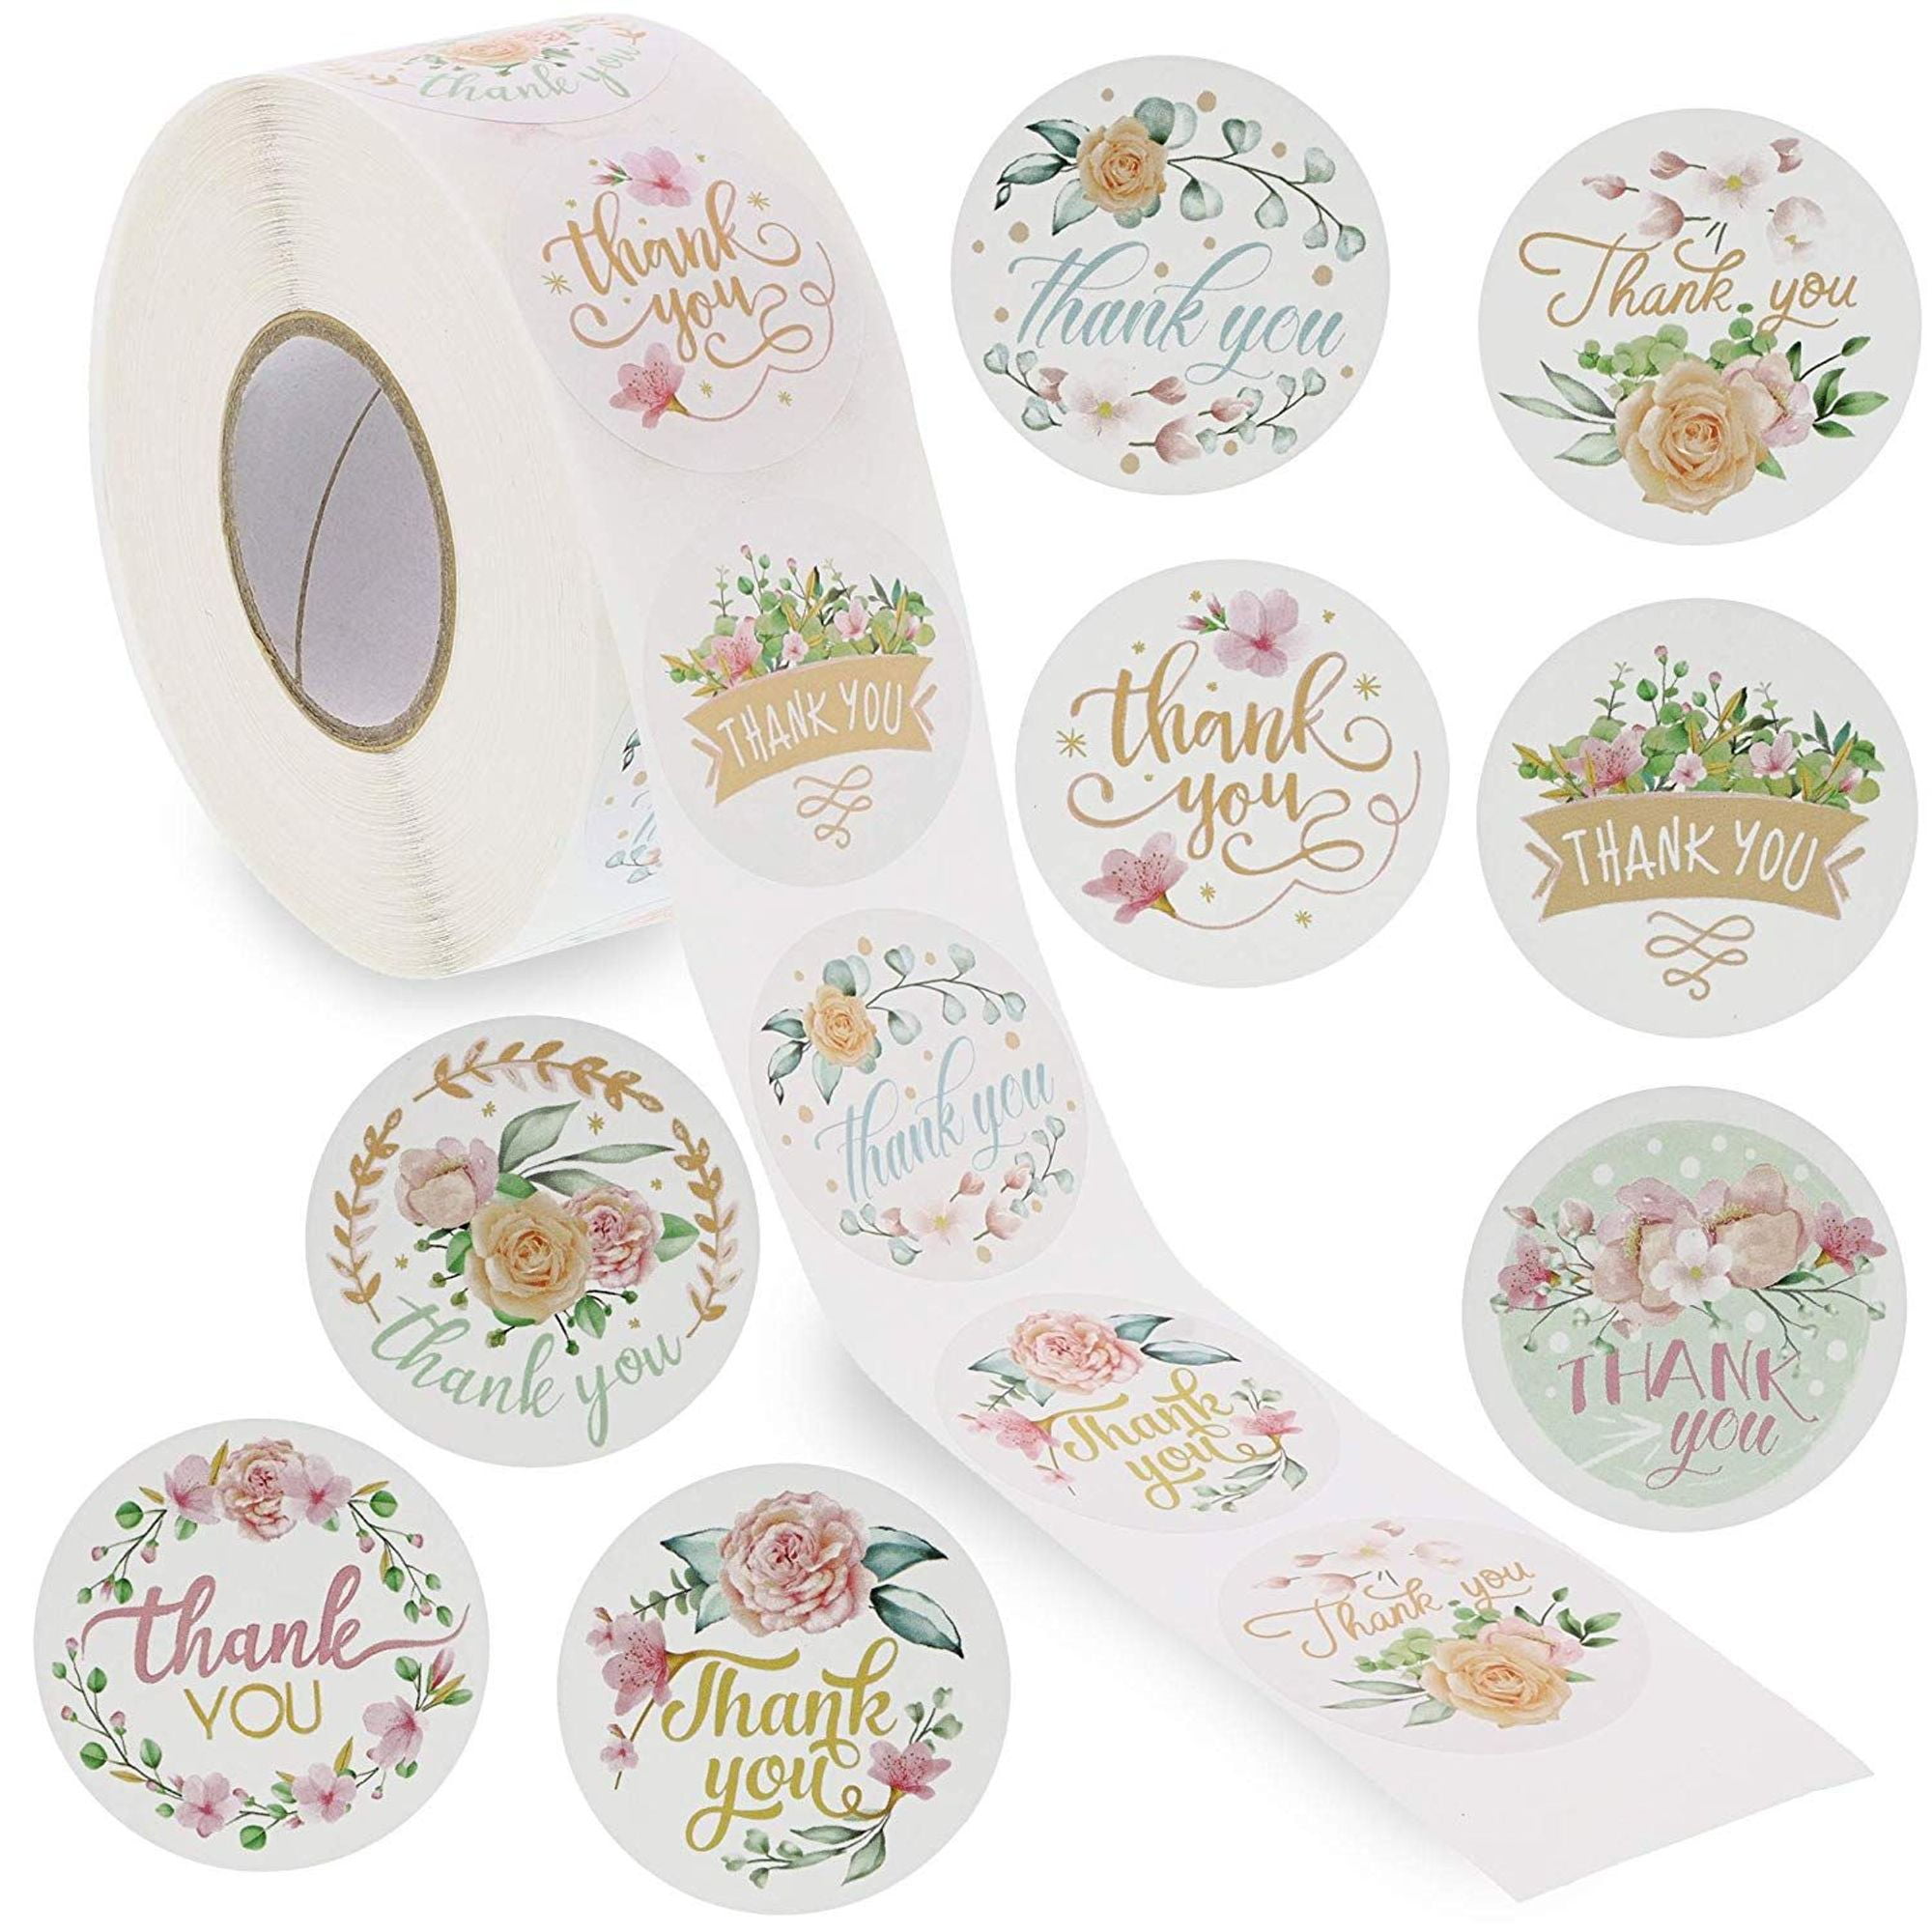 Waful Thank You Round Stickers Label for Baby Shower/Wedding/Birthday/Party,500 Stickers/Roll,Crafts Decoration,1 Inch Diameter 